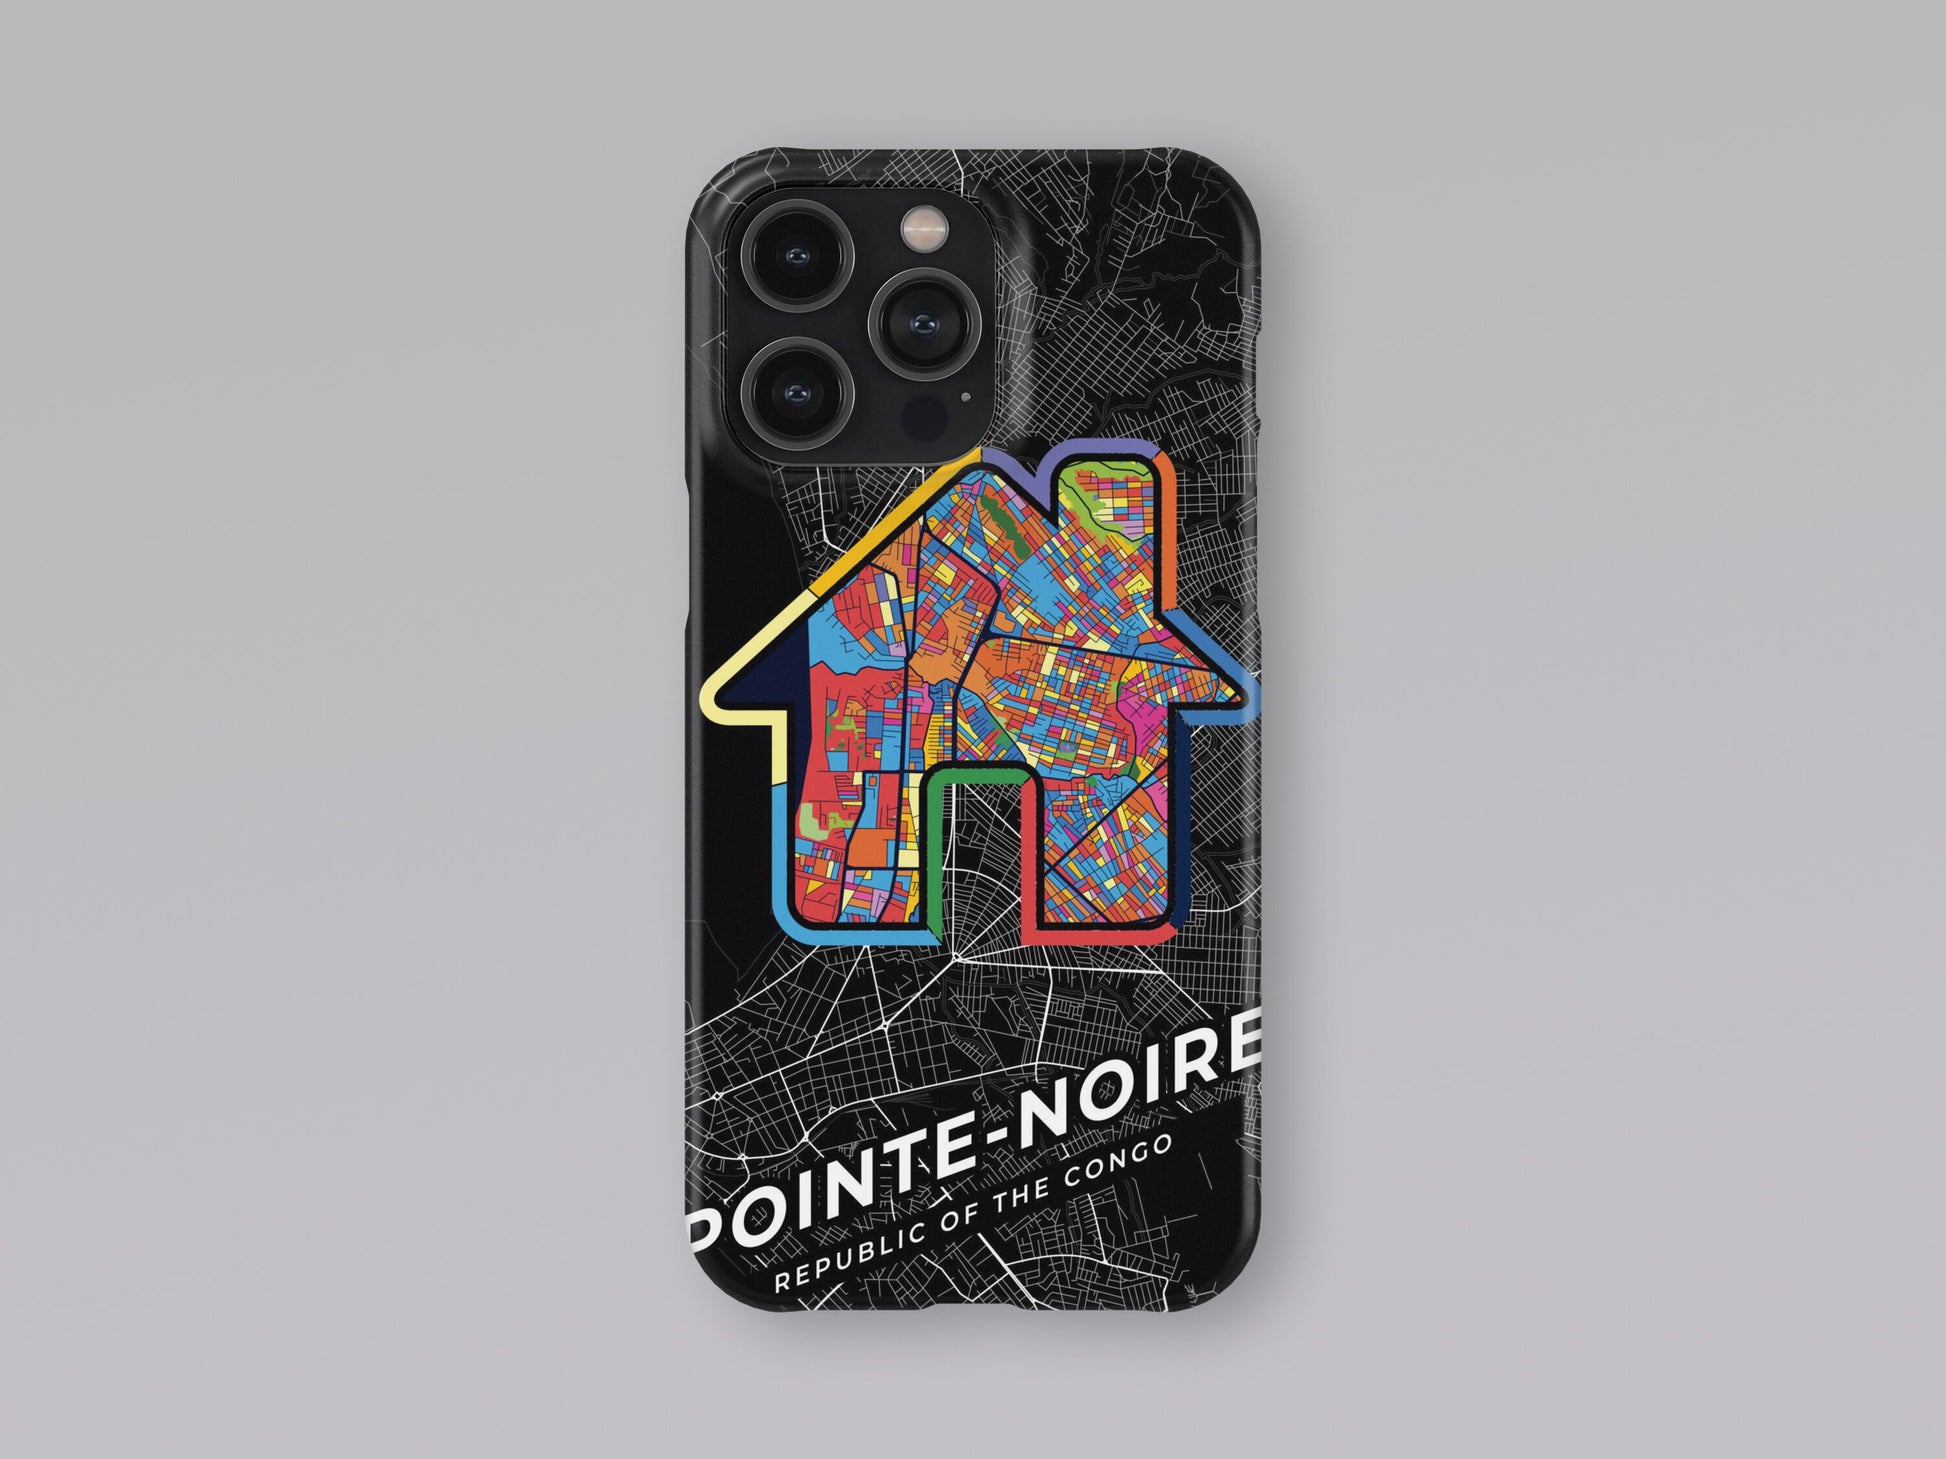 Pointe-Noire Republic Of The Congo slim phone case with colorful icon 3